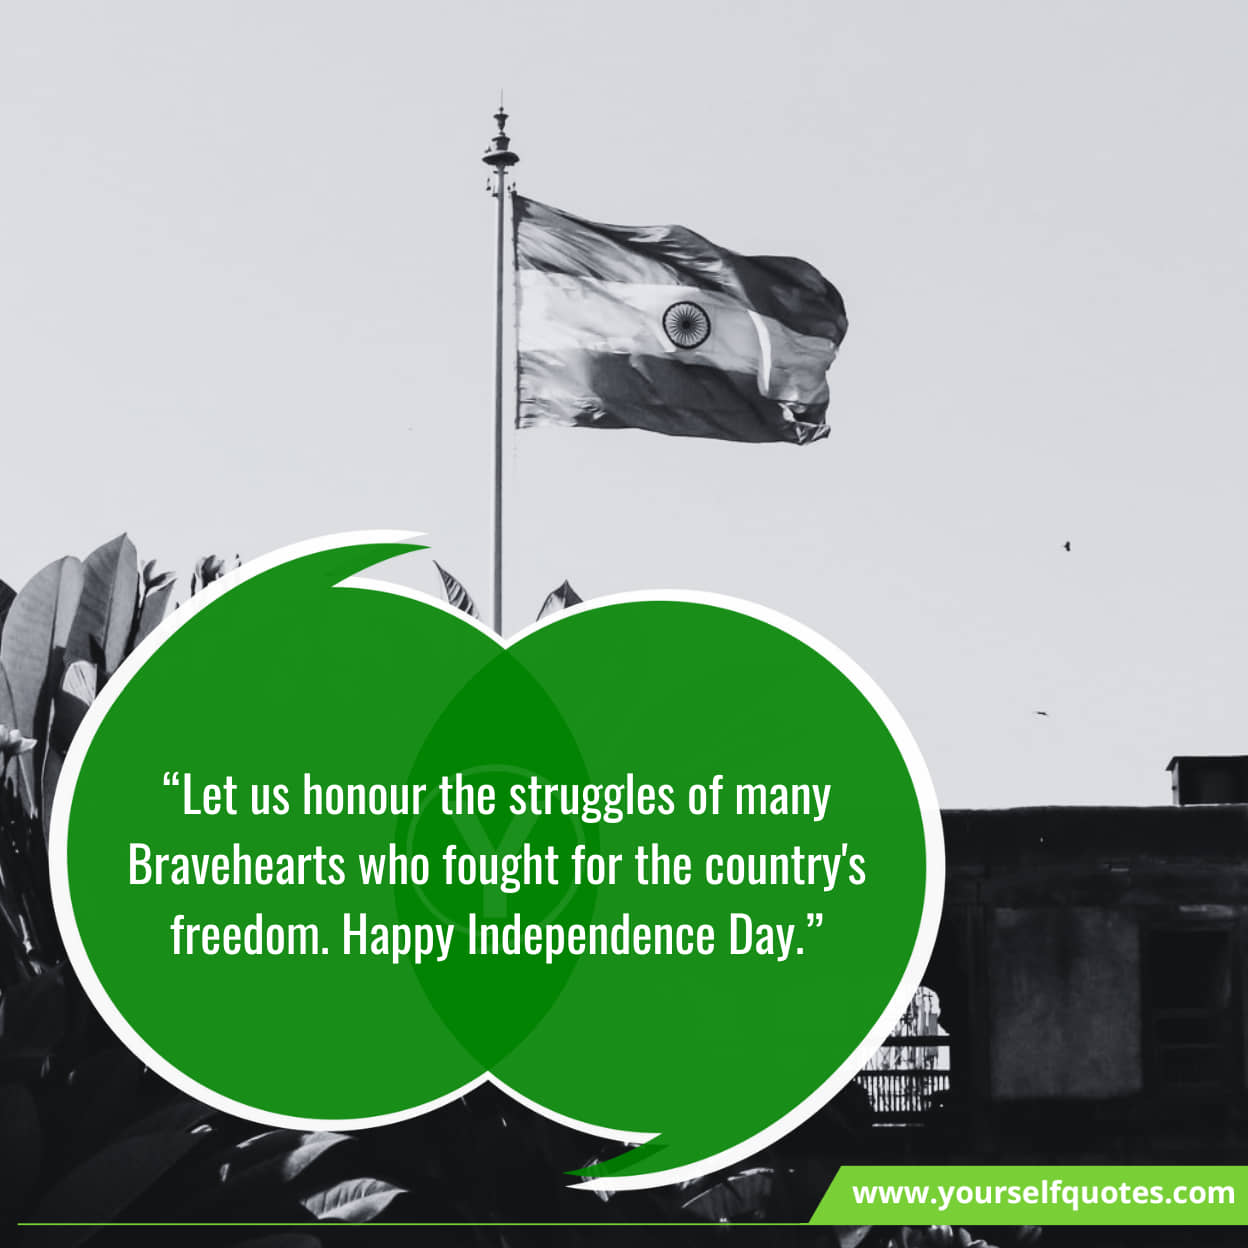 Latest Happy Independence Messages For Freedom Fighters